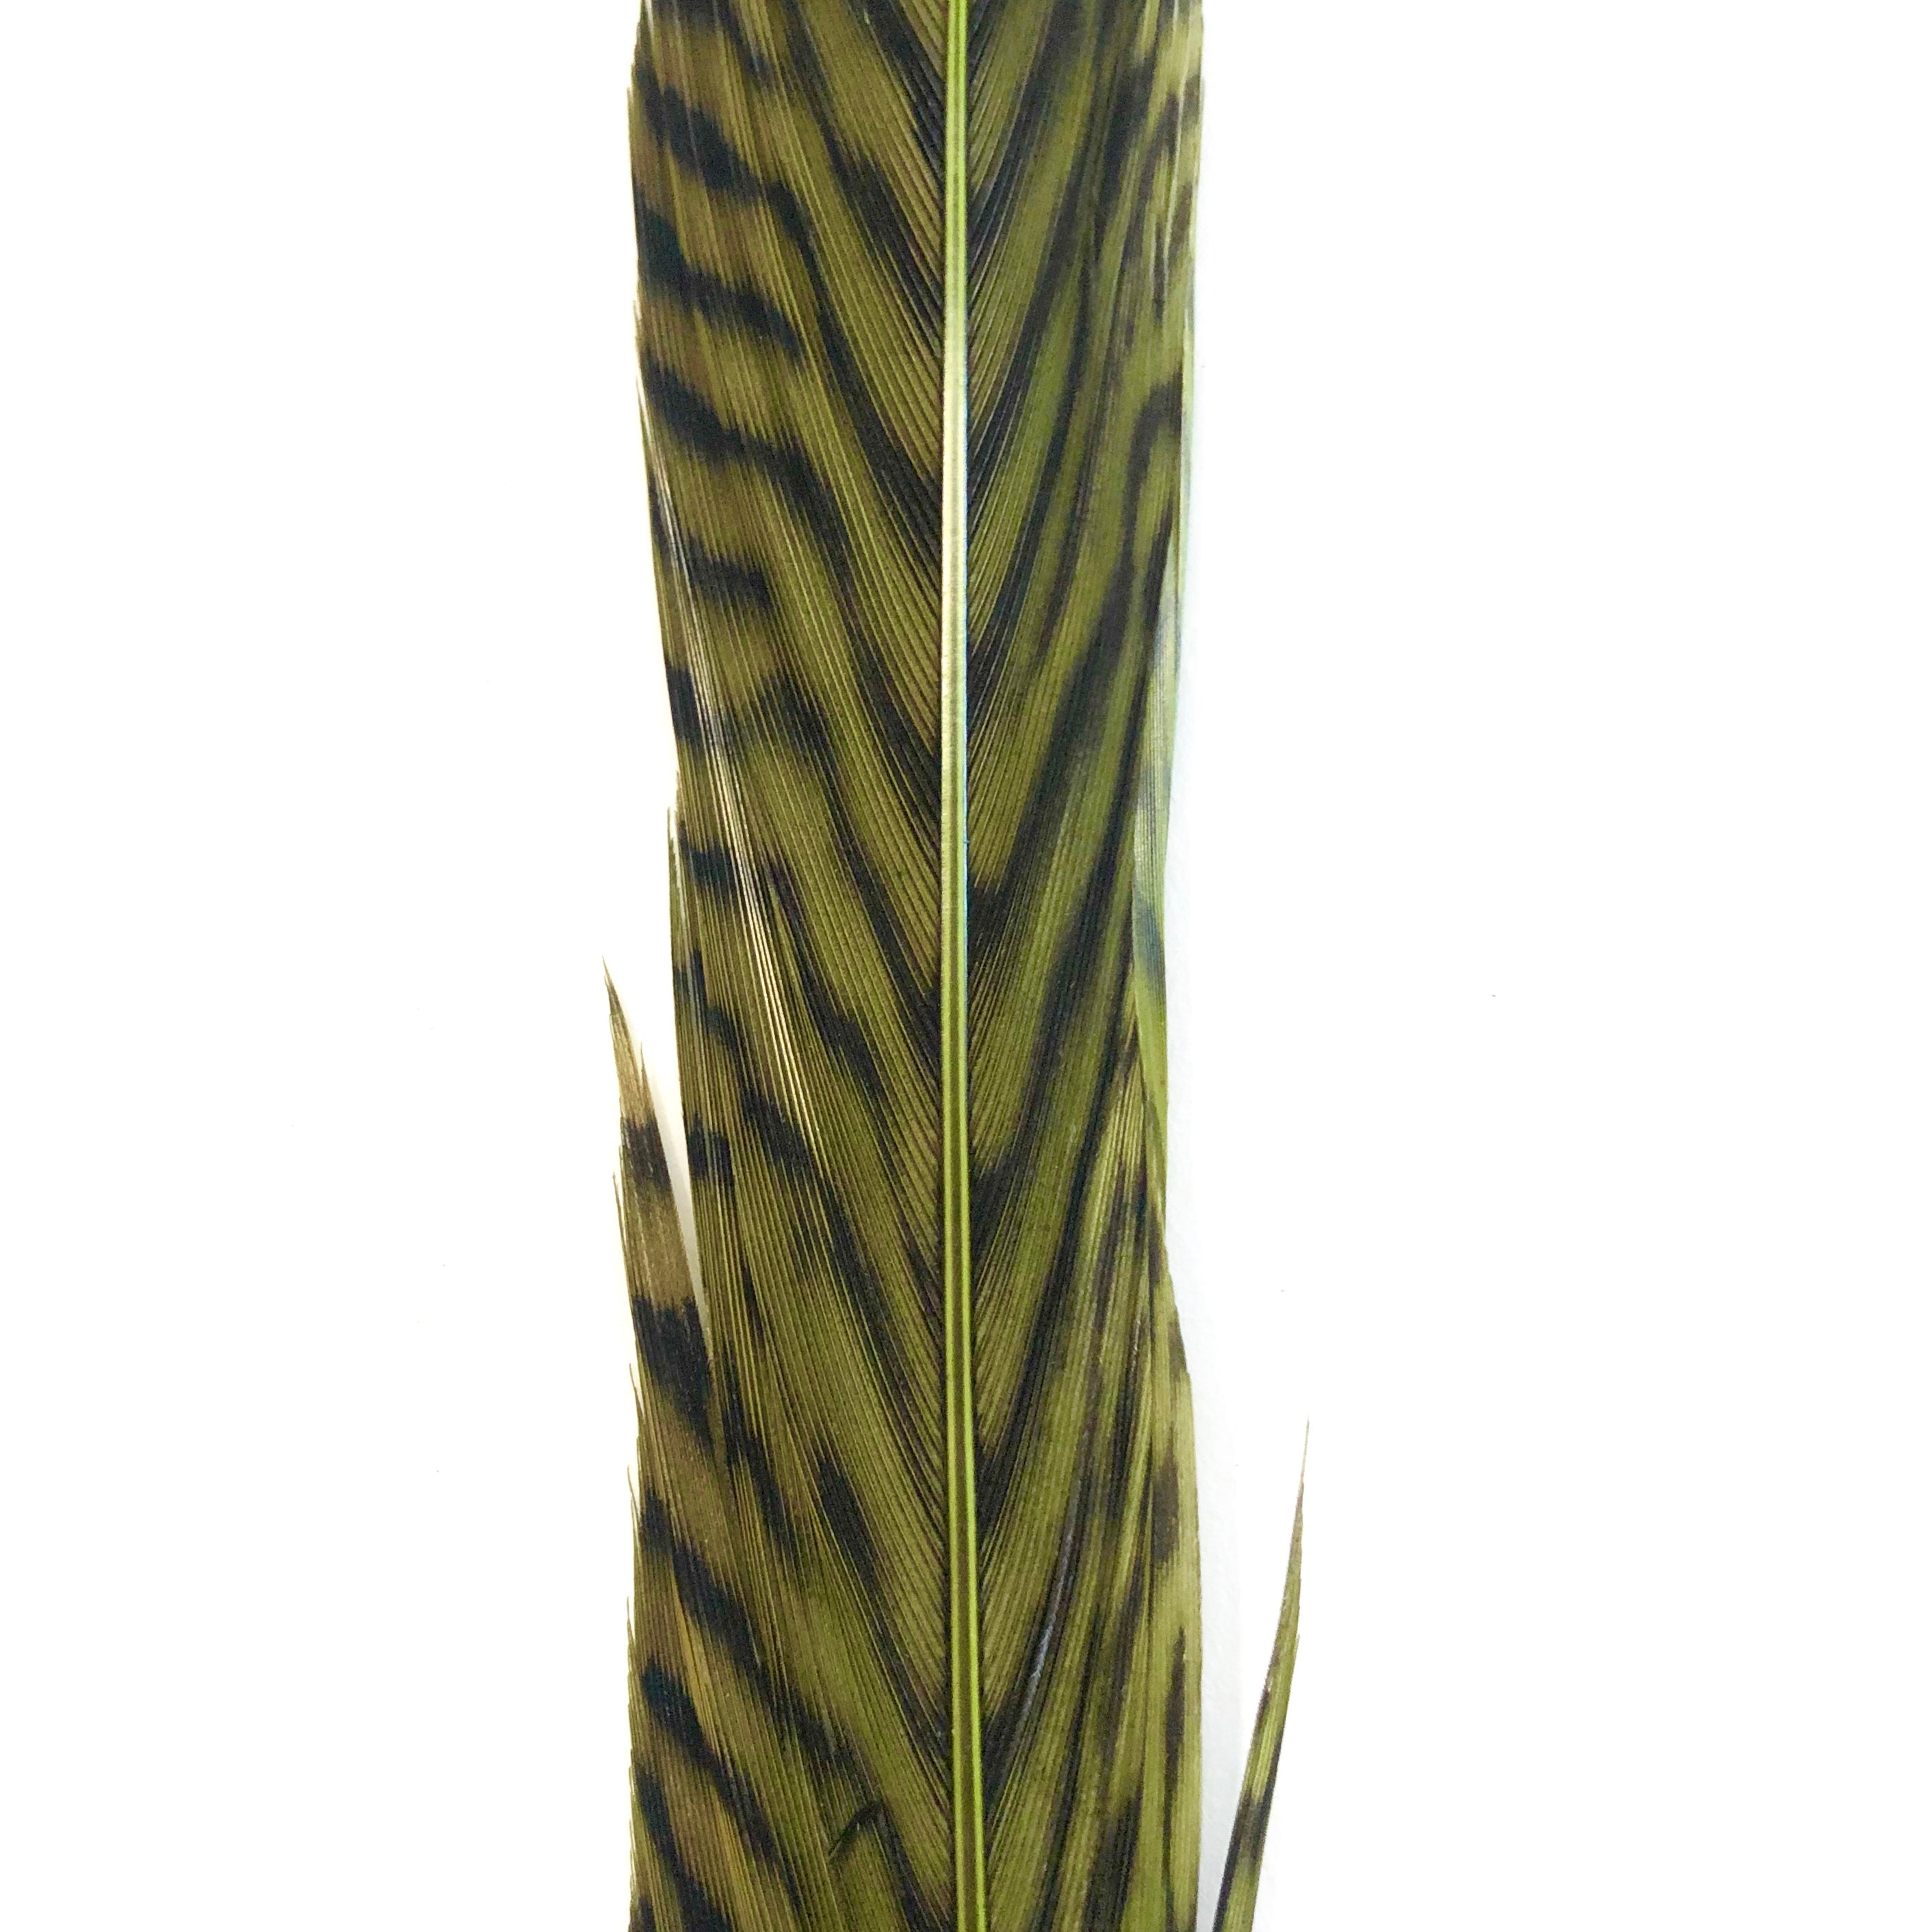 10" to 20" Golden Pheasant Side Tail Feather - Olive Green ((SECONDS))